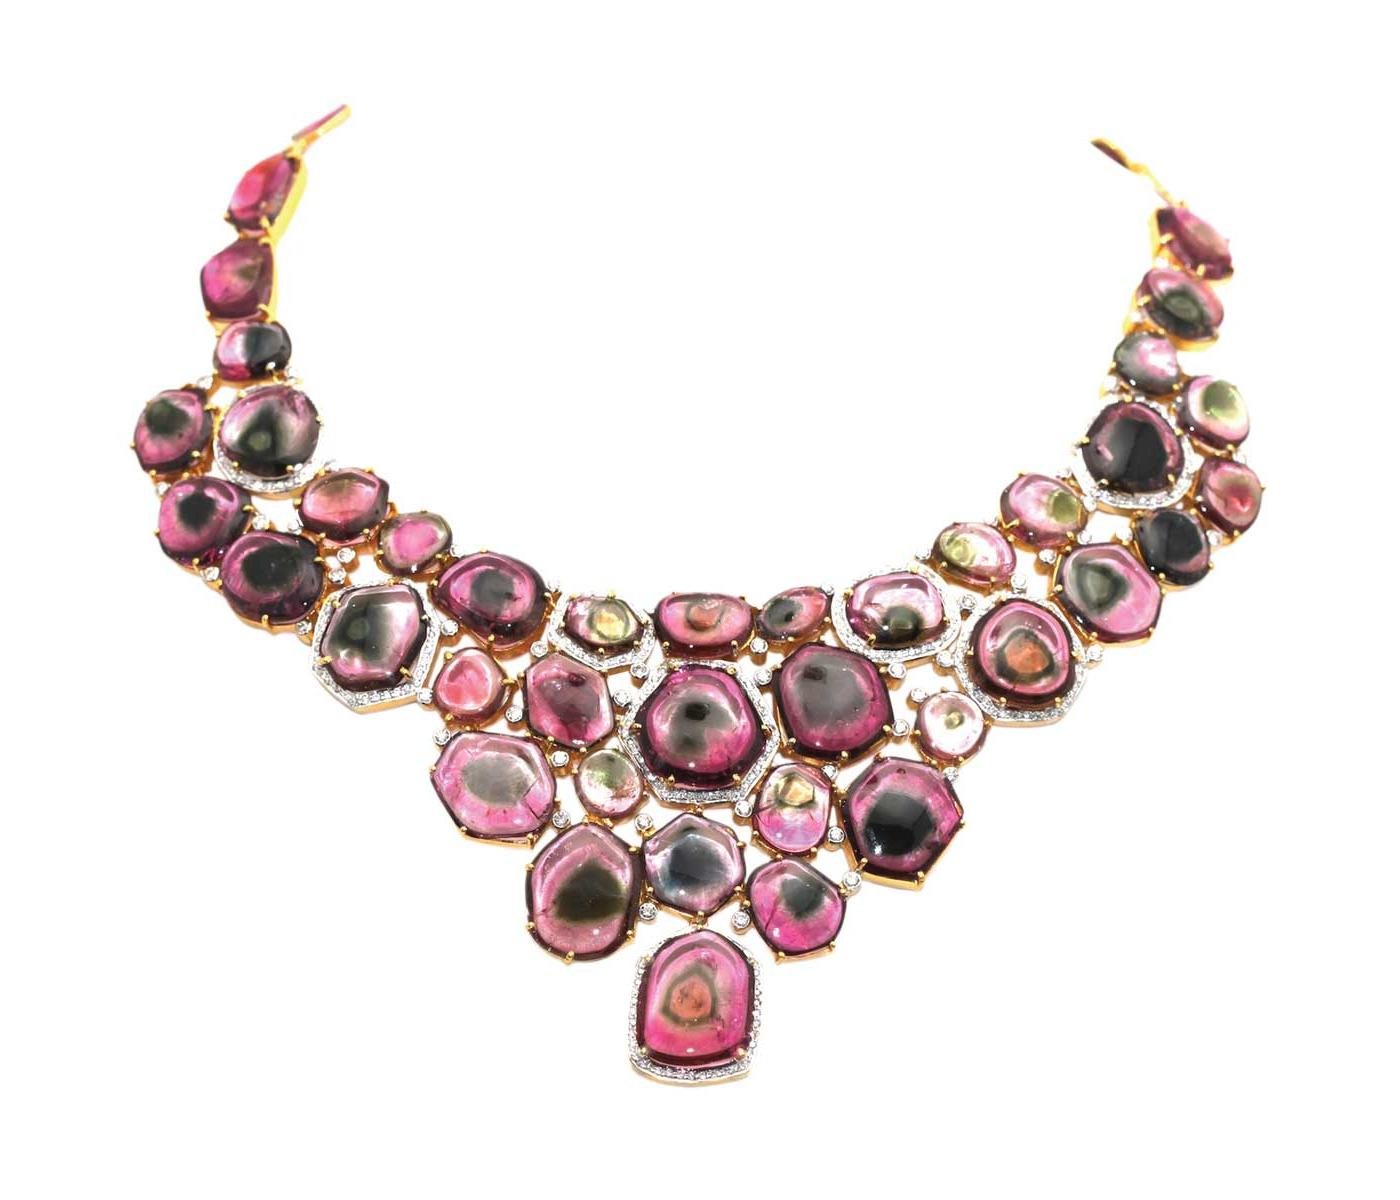 Necklace by Tresor